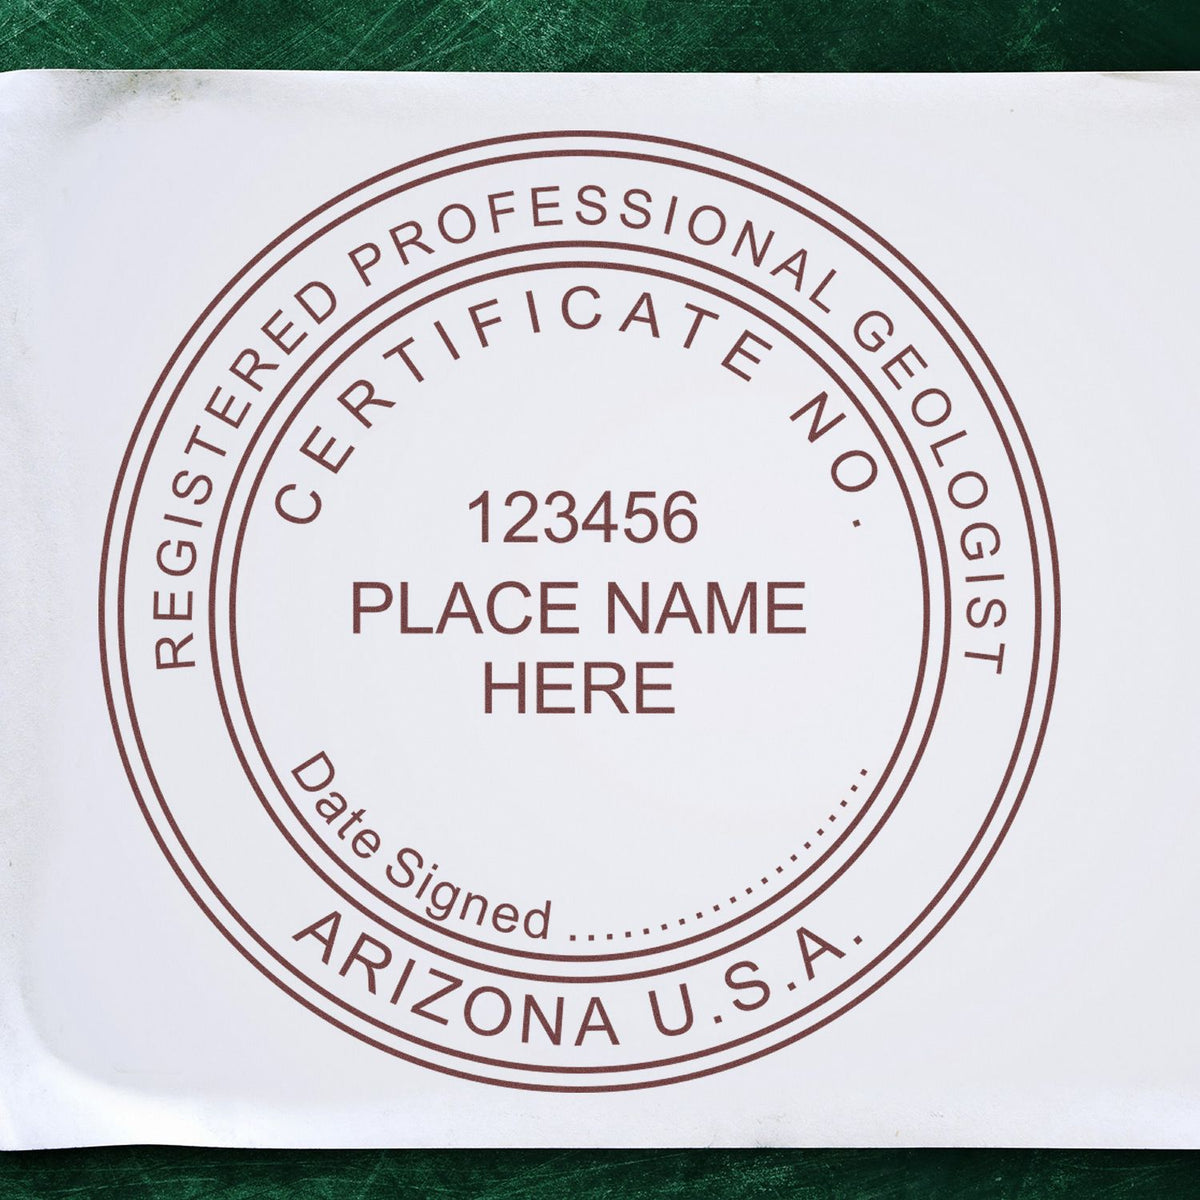 The Self-Inking Arizona Geologist Stamp stamp impression comes to life with a crisp, detailed image stamped on paper - showcasing true professional quality.